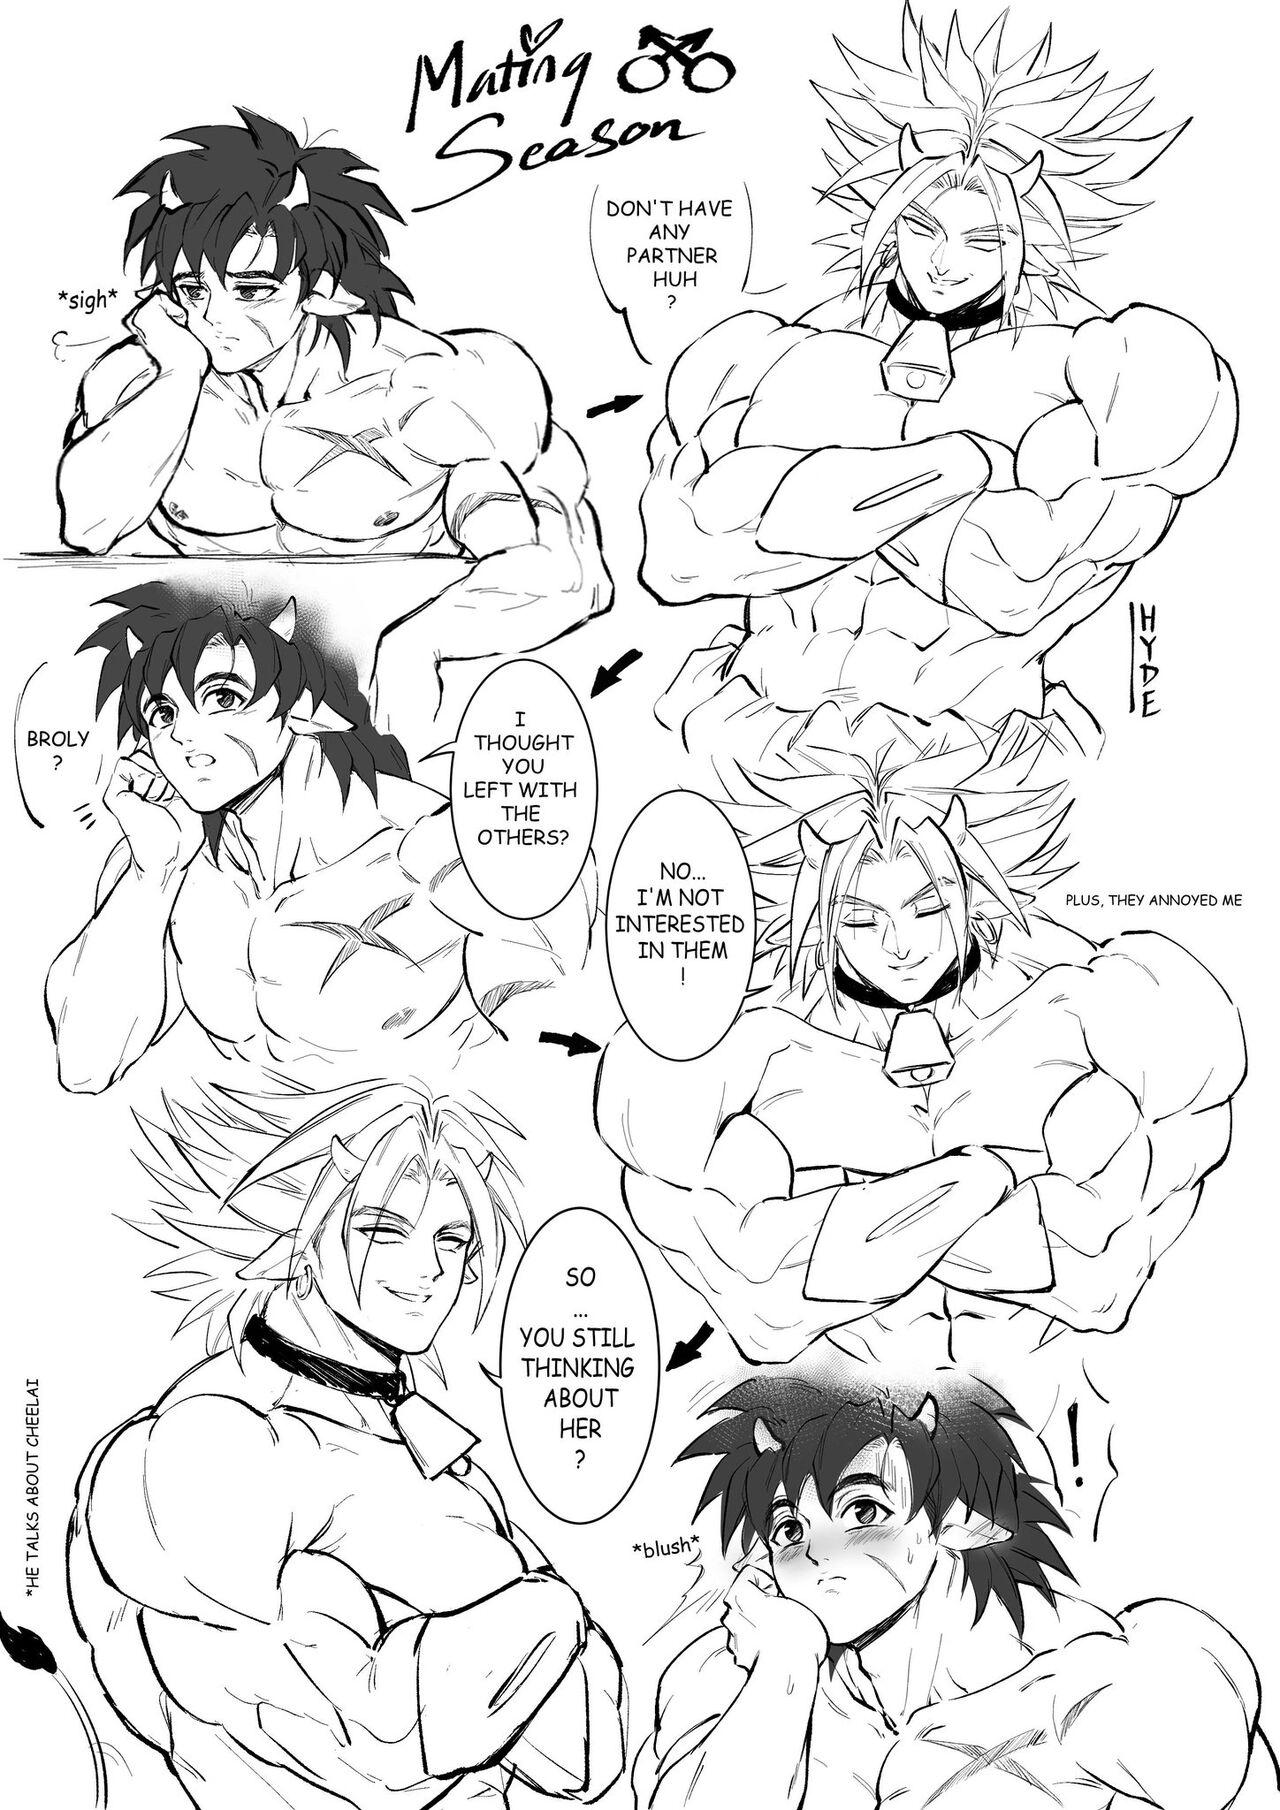 Passionate Cow broly - Dragon ball super Casting - Page 1